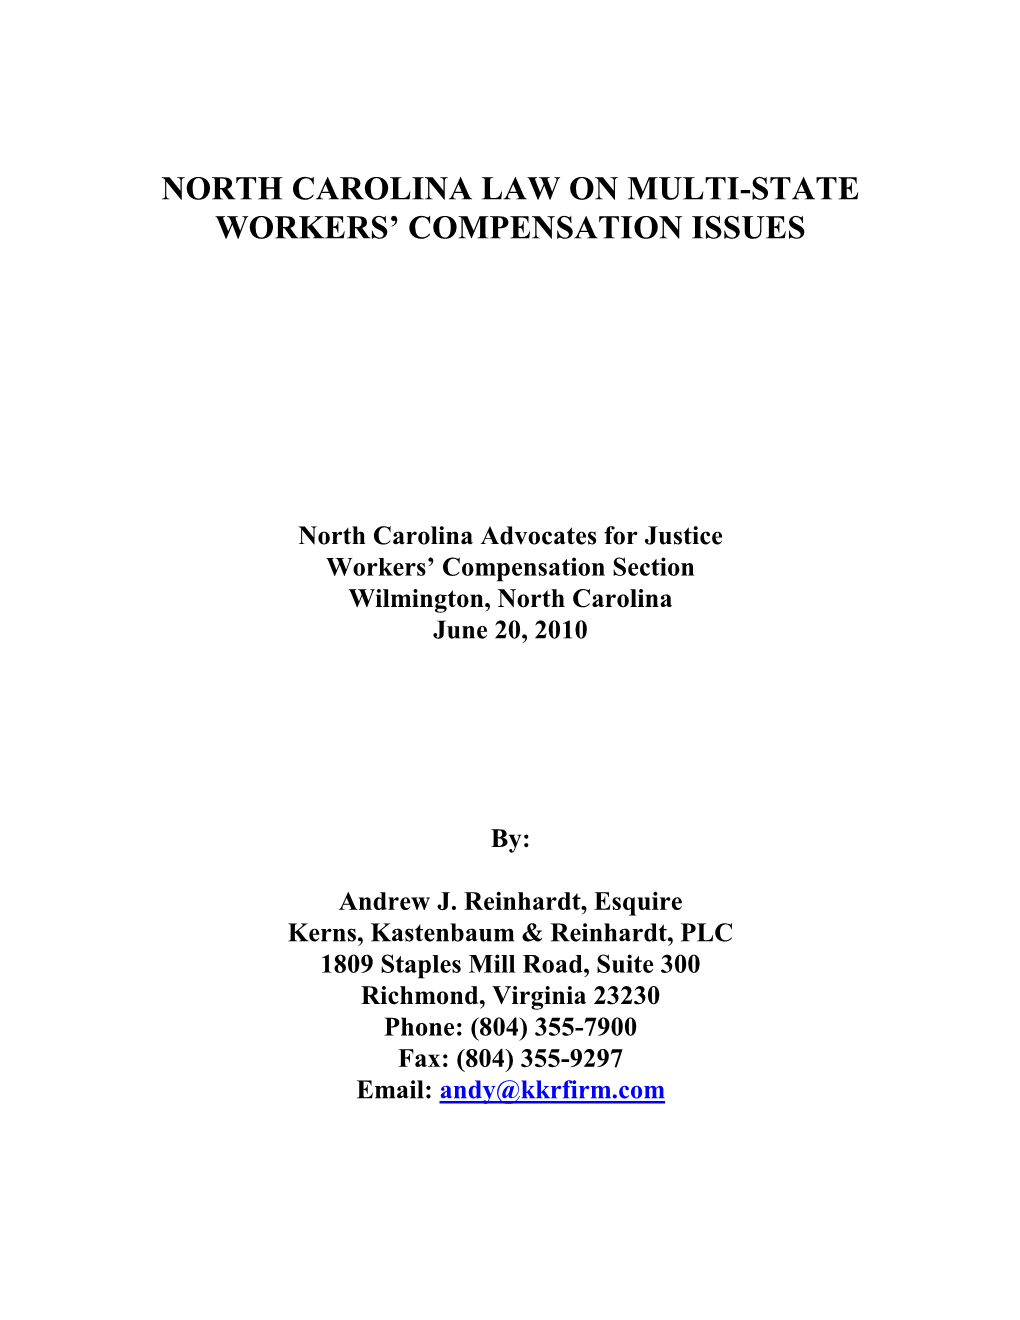 North Carolina Law on Multi-State Workers' Compensation Issues